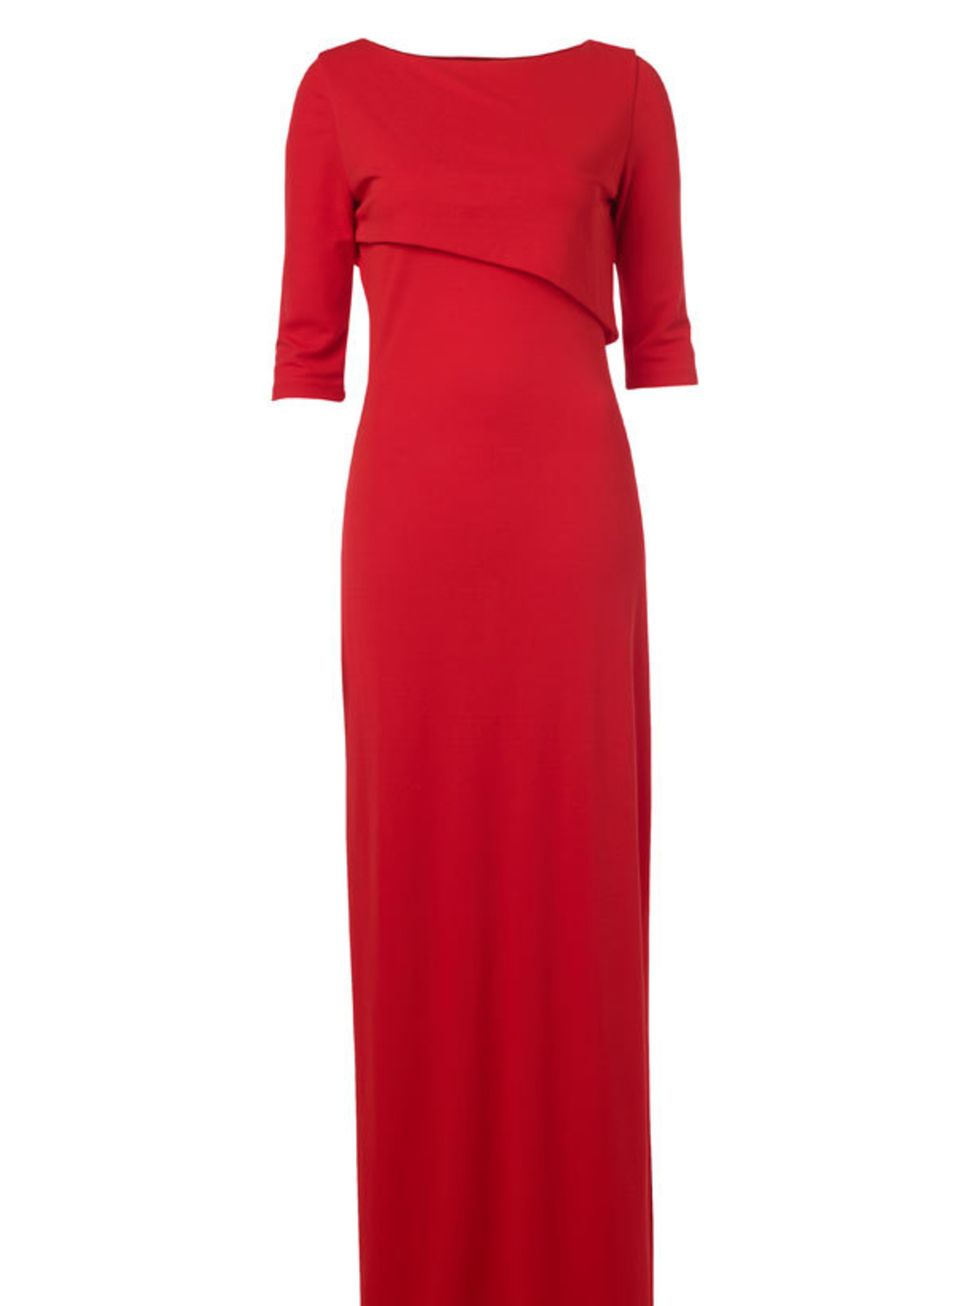 <p>Osman Yousefzada for John Lewis red maxi dress, £250, at <a href="http://www.johnlewis.com/282714/Product.aspx">John Lewis</a></p>